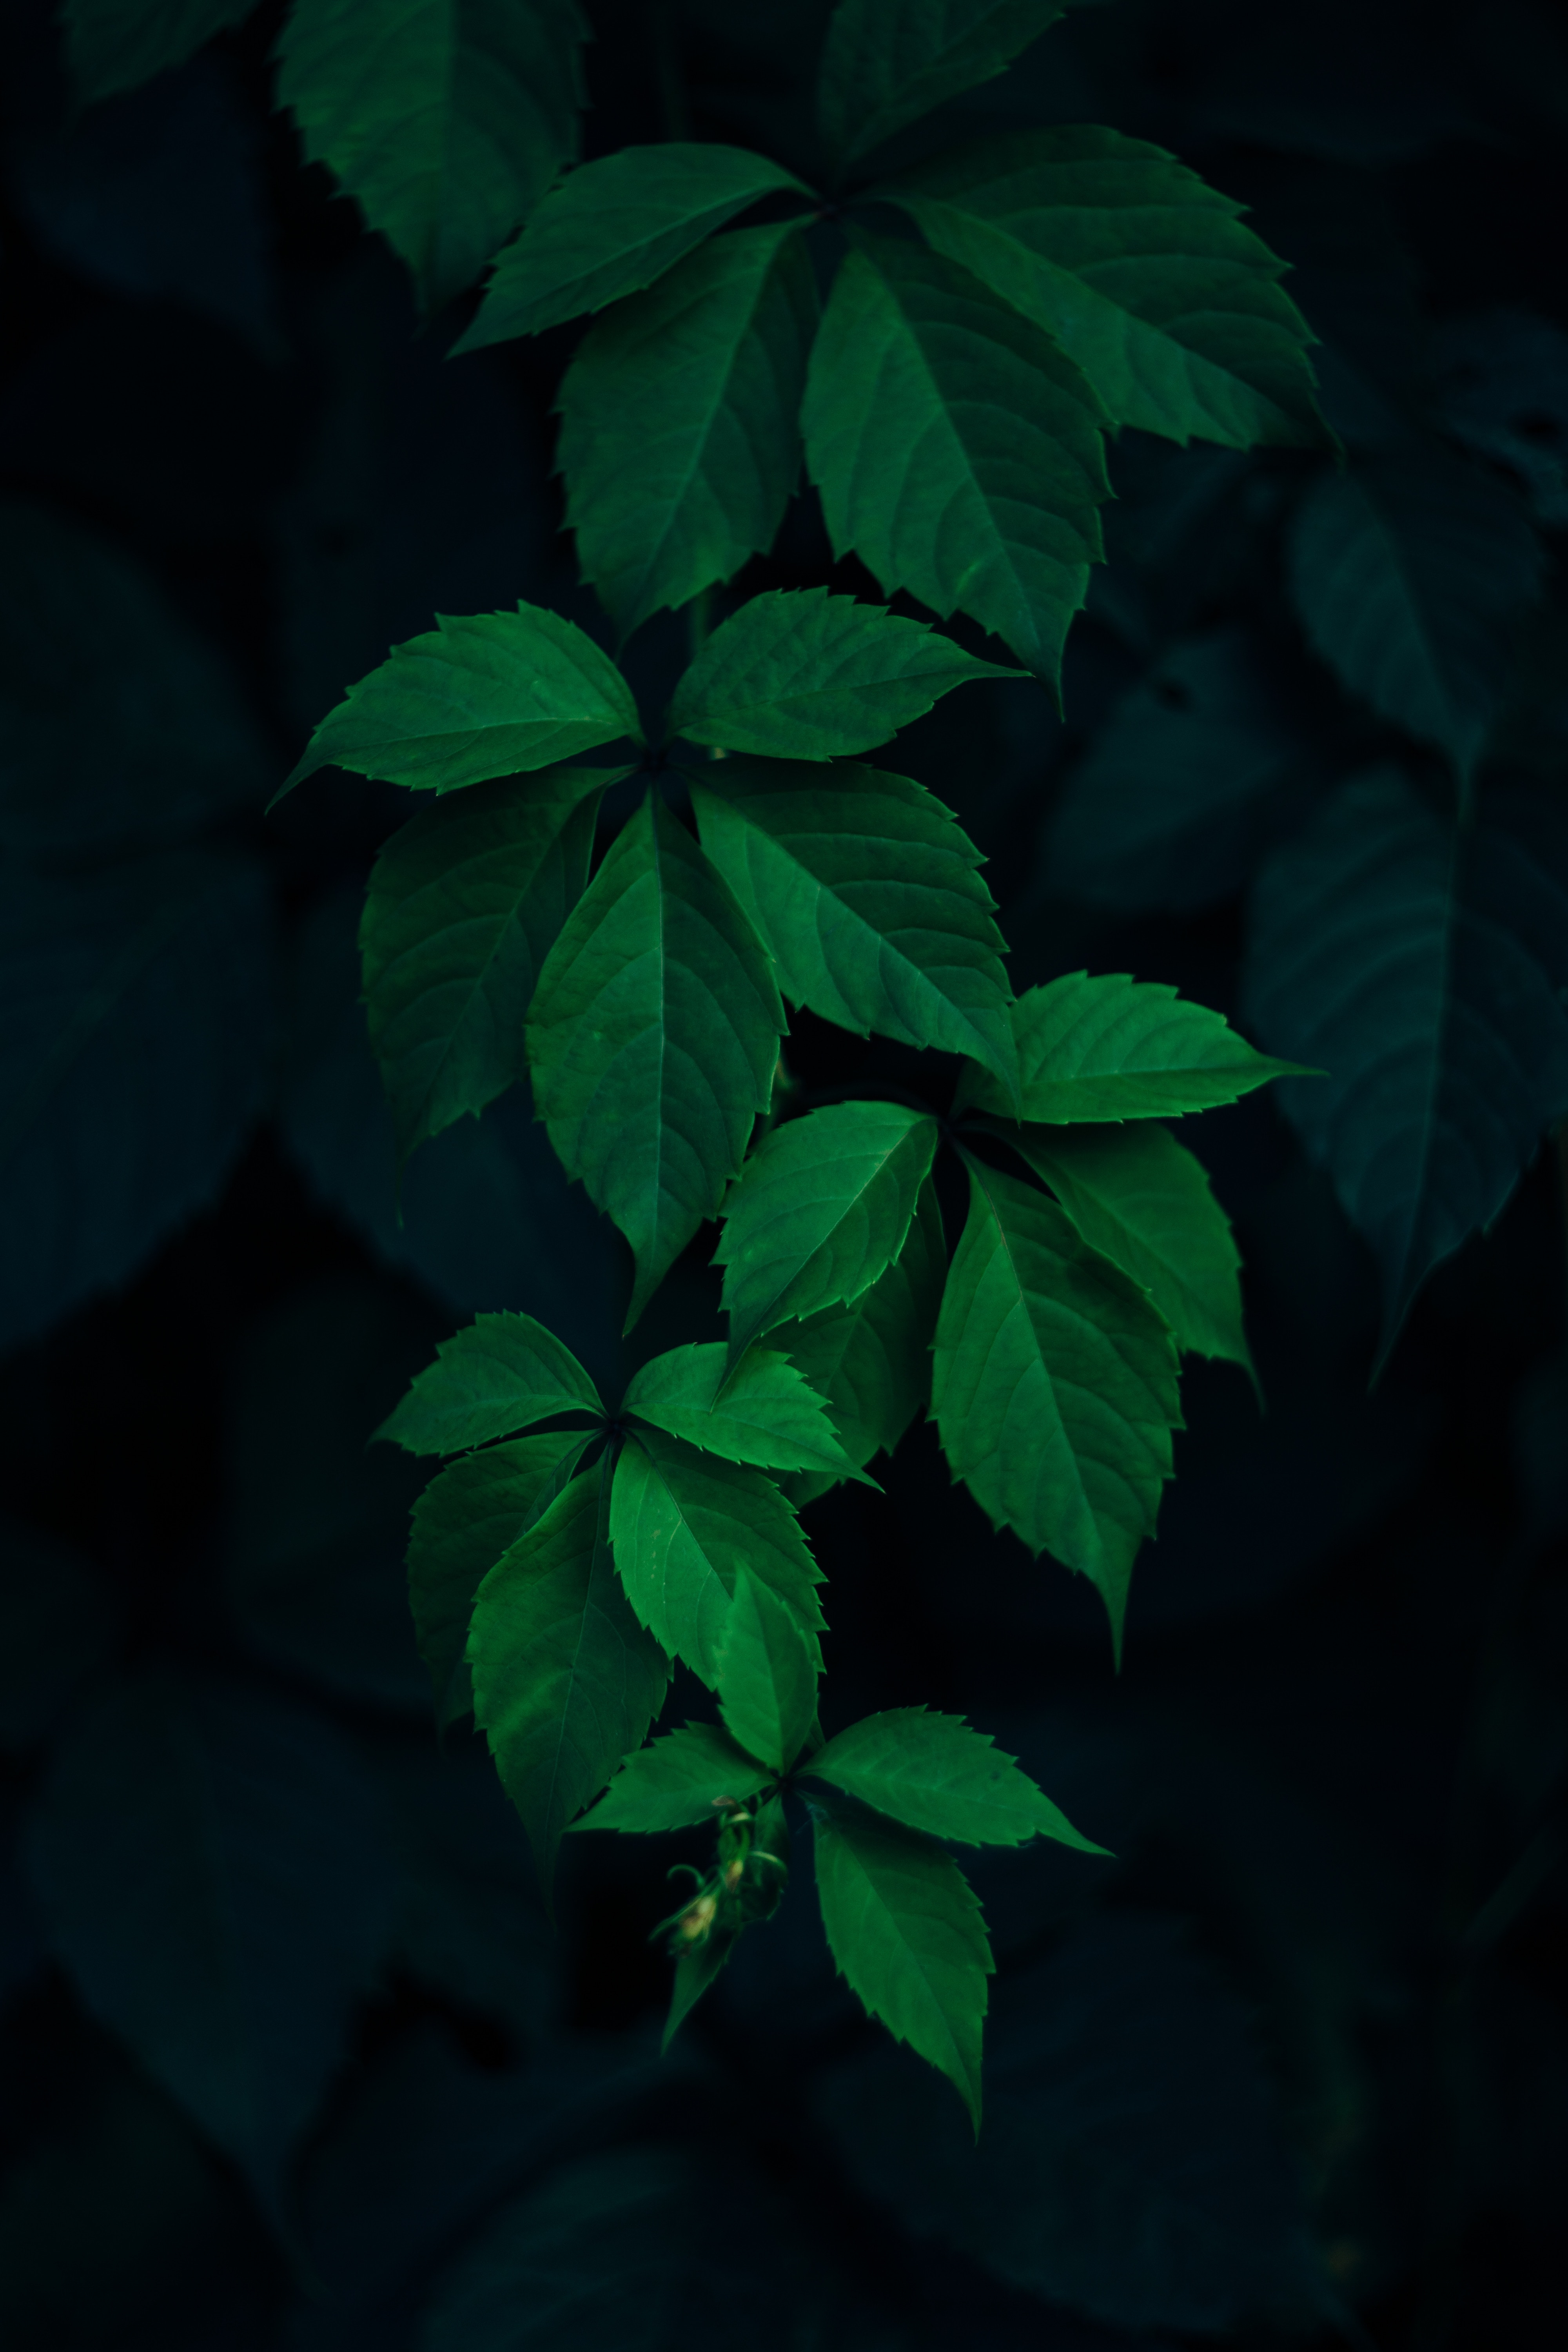 green leaves plant during night time free image | Peakpx